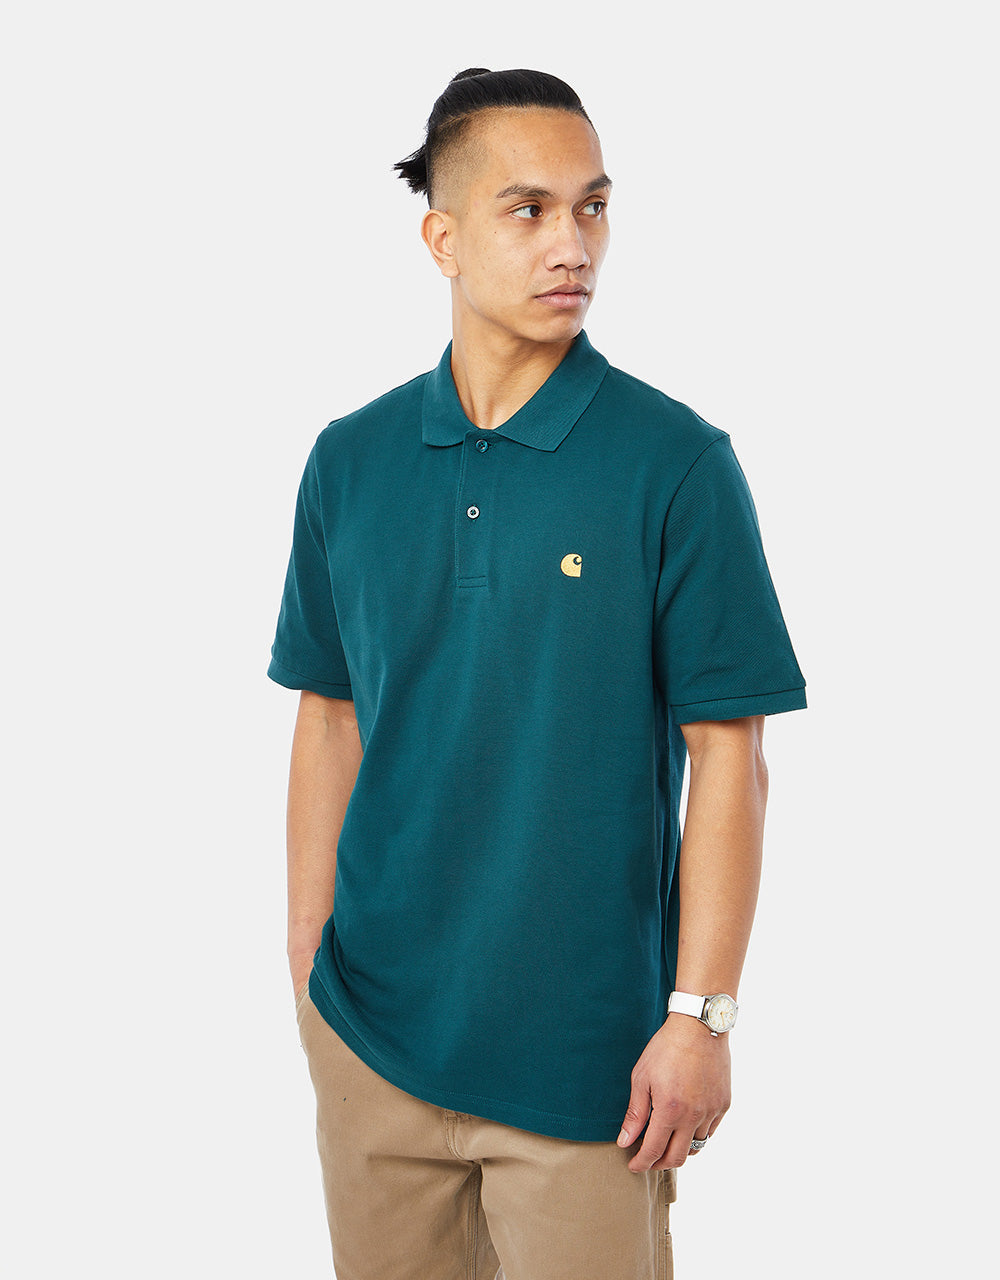 Carhartt WIP S/S Chase Pique Polo - Botanic/Gold – Route One